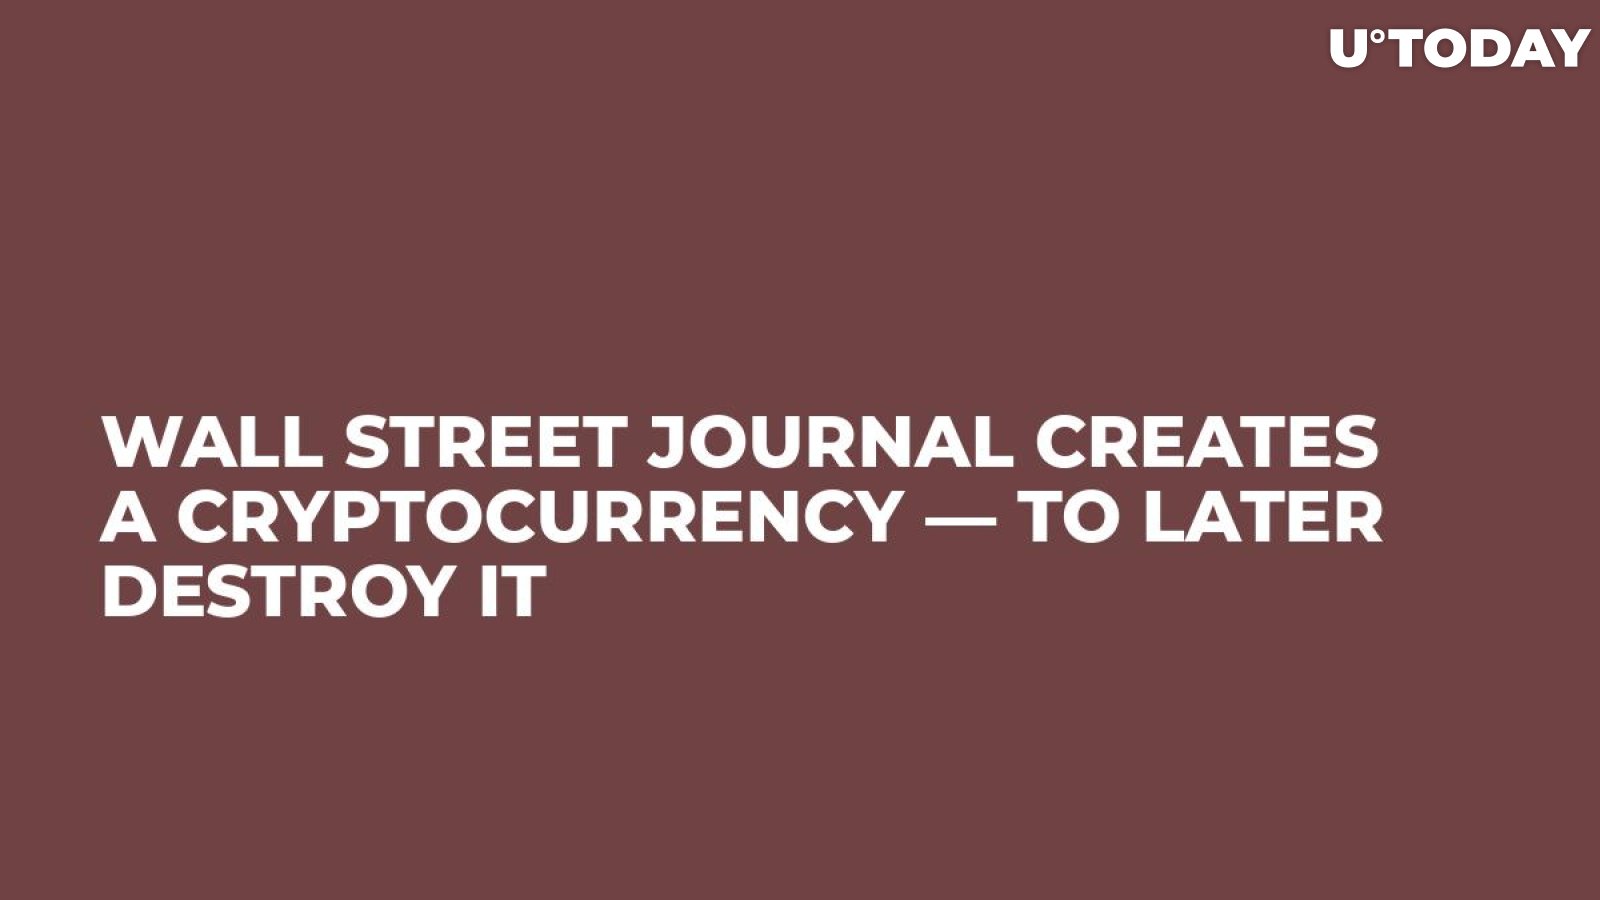 Wall Street Journal Creates A Cryptocurrency — To Later Destroy It